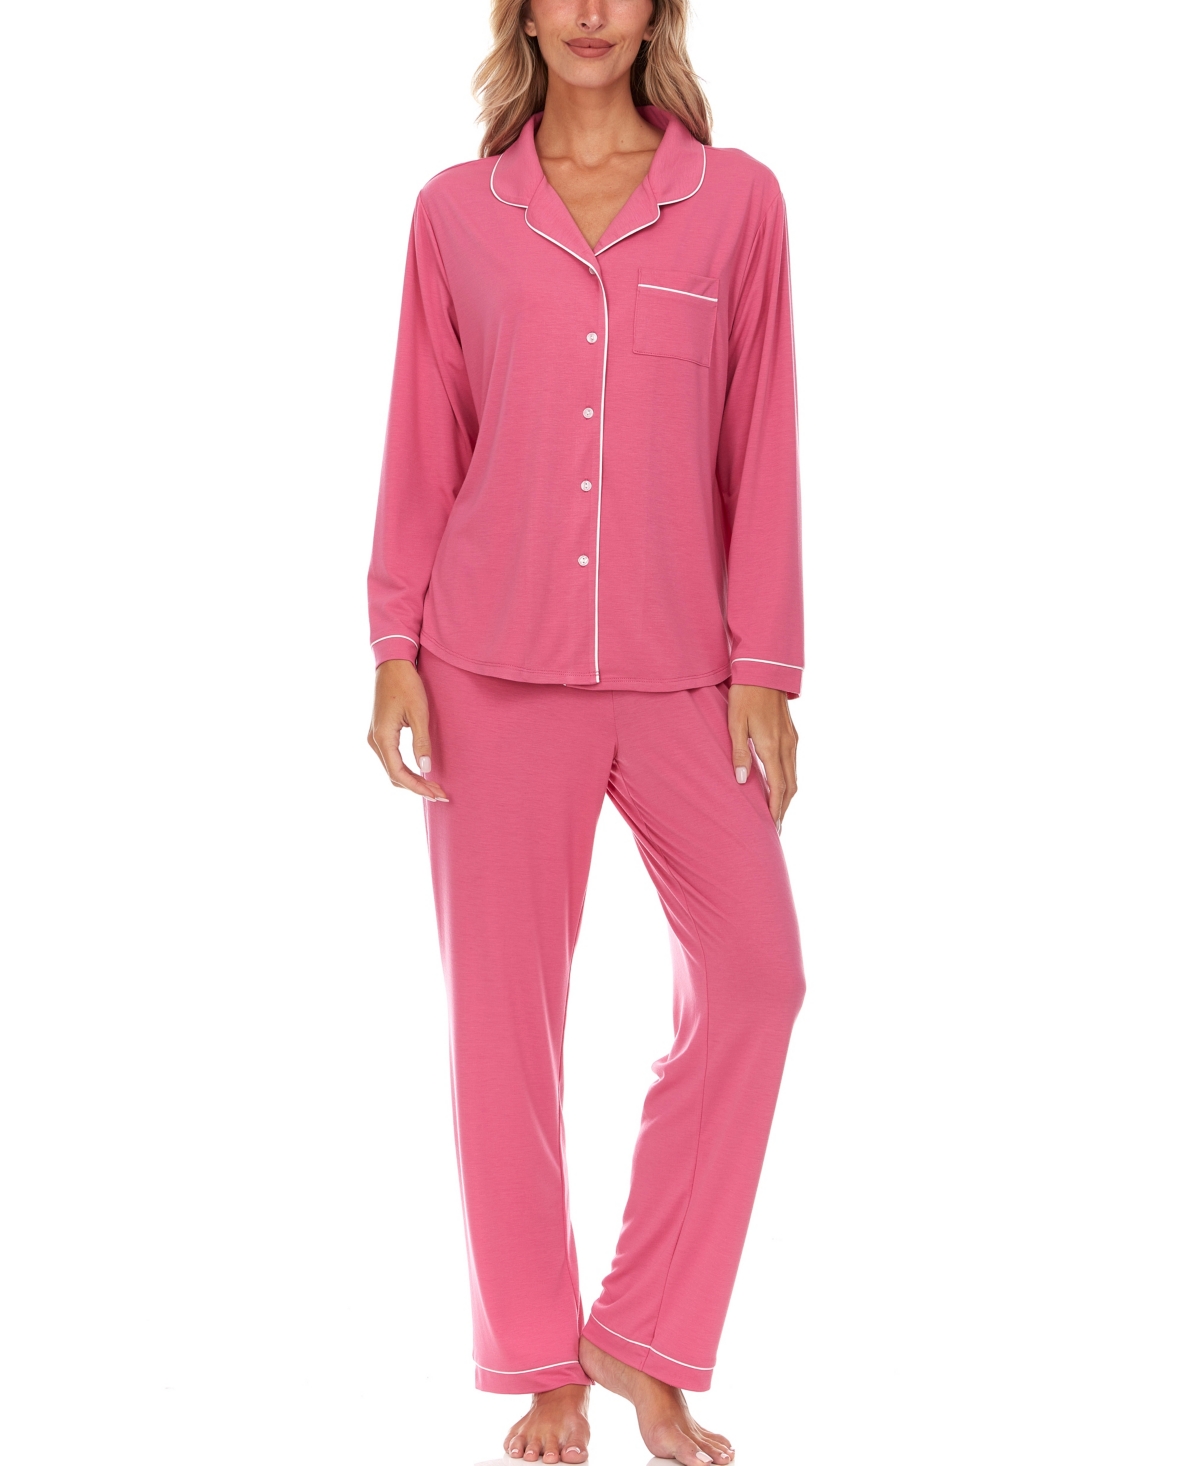 Women's Annie 2 Piece Notch Long Sleeve Top and Knit Pants Pajama Set - Hot Pink